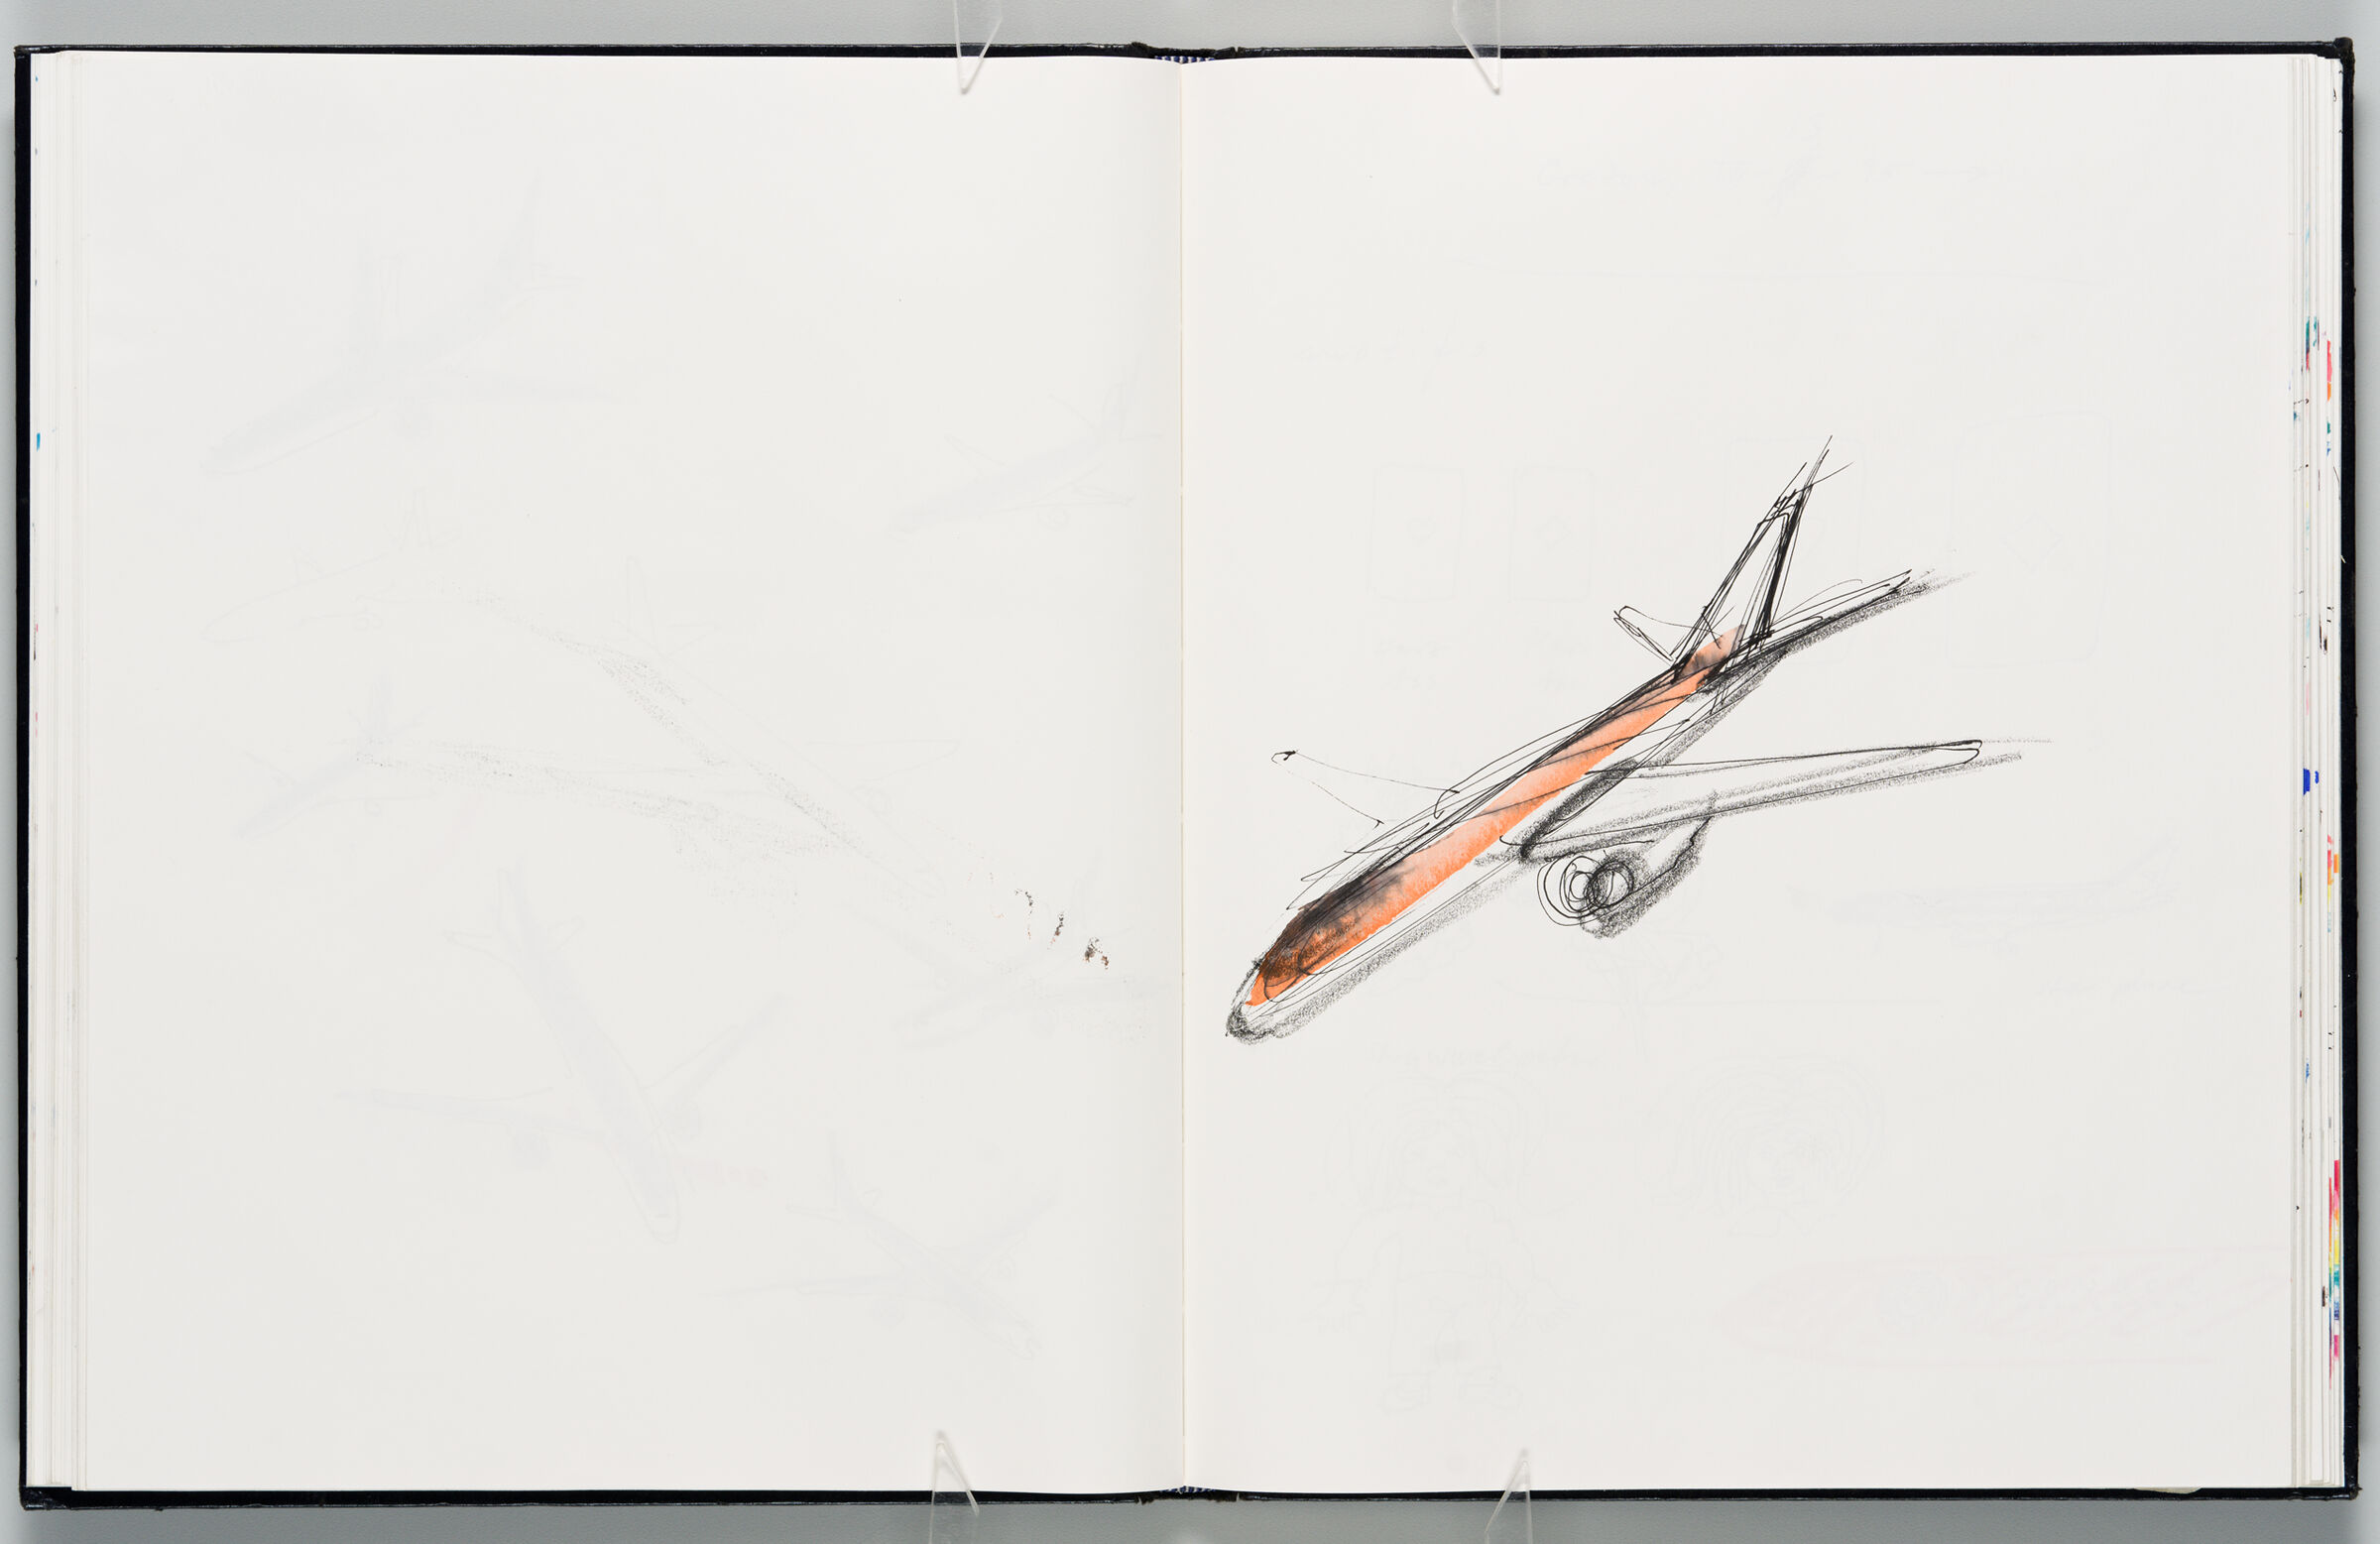 Untitled (Blank With Graphite And Color Transfer, Left Page); Untitled (Designs For Condor Planes, Right Page)